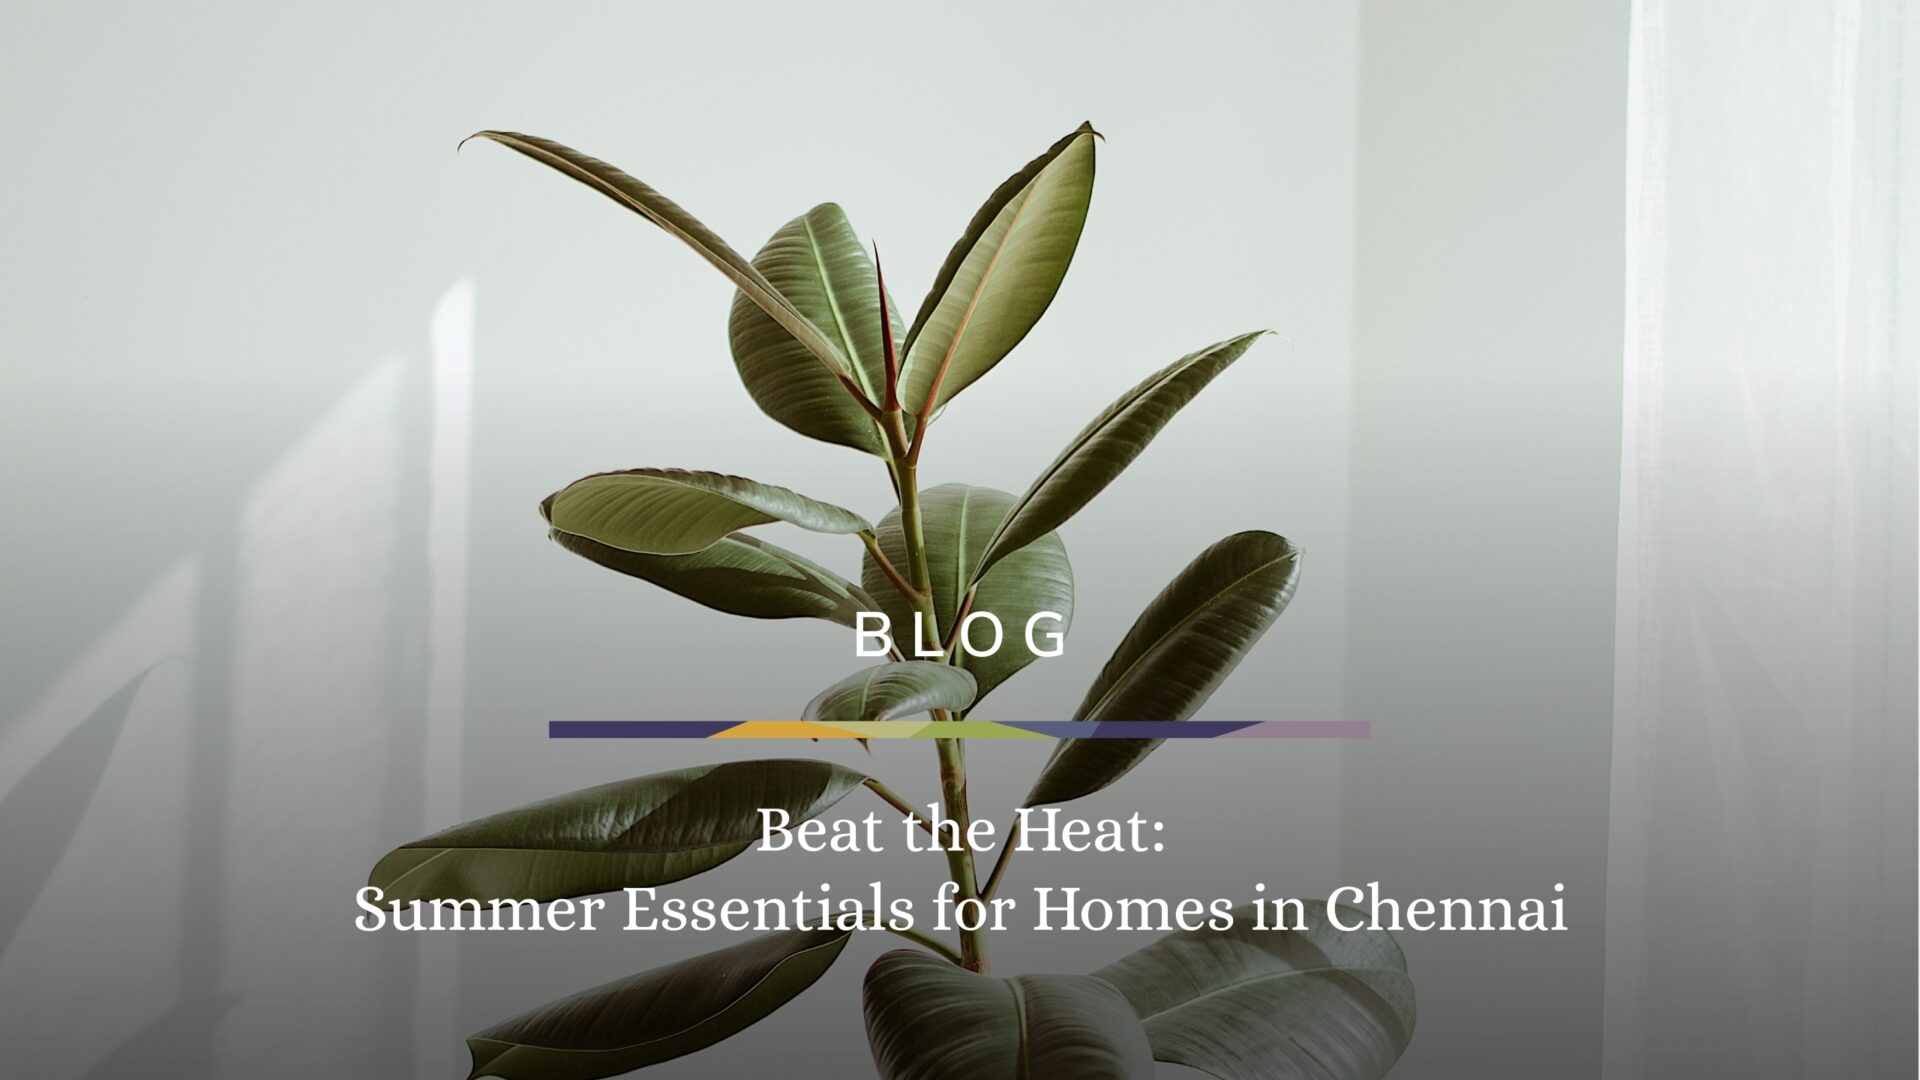 Blog - Beat the Heat: Summer Essentials for Homes in Chennai